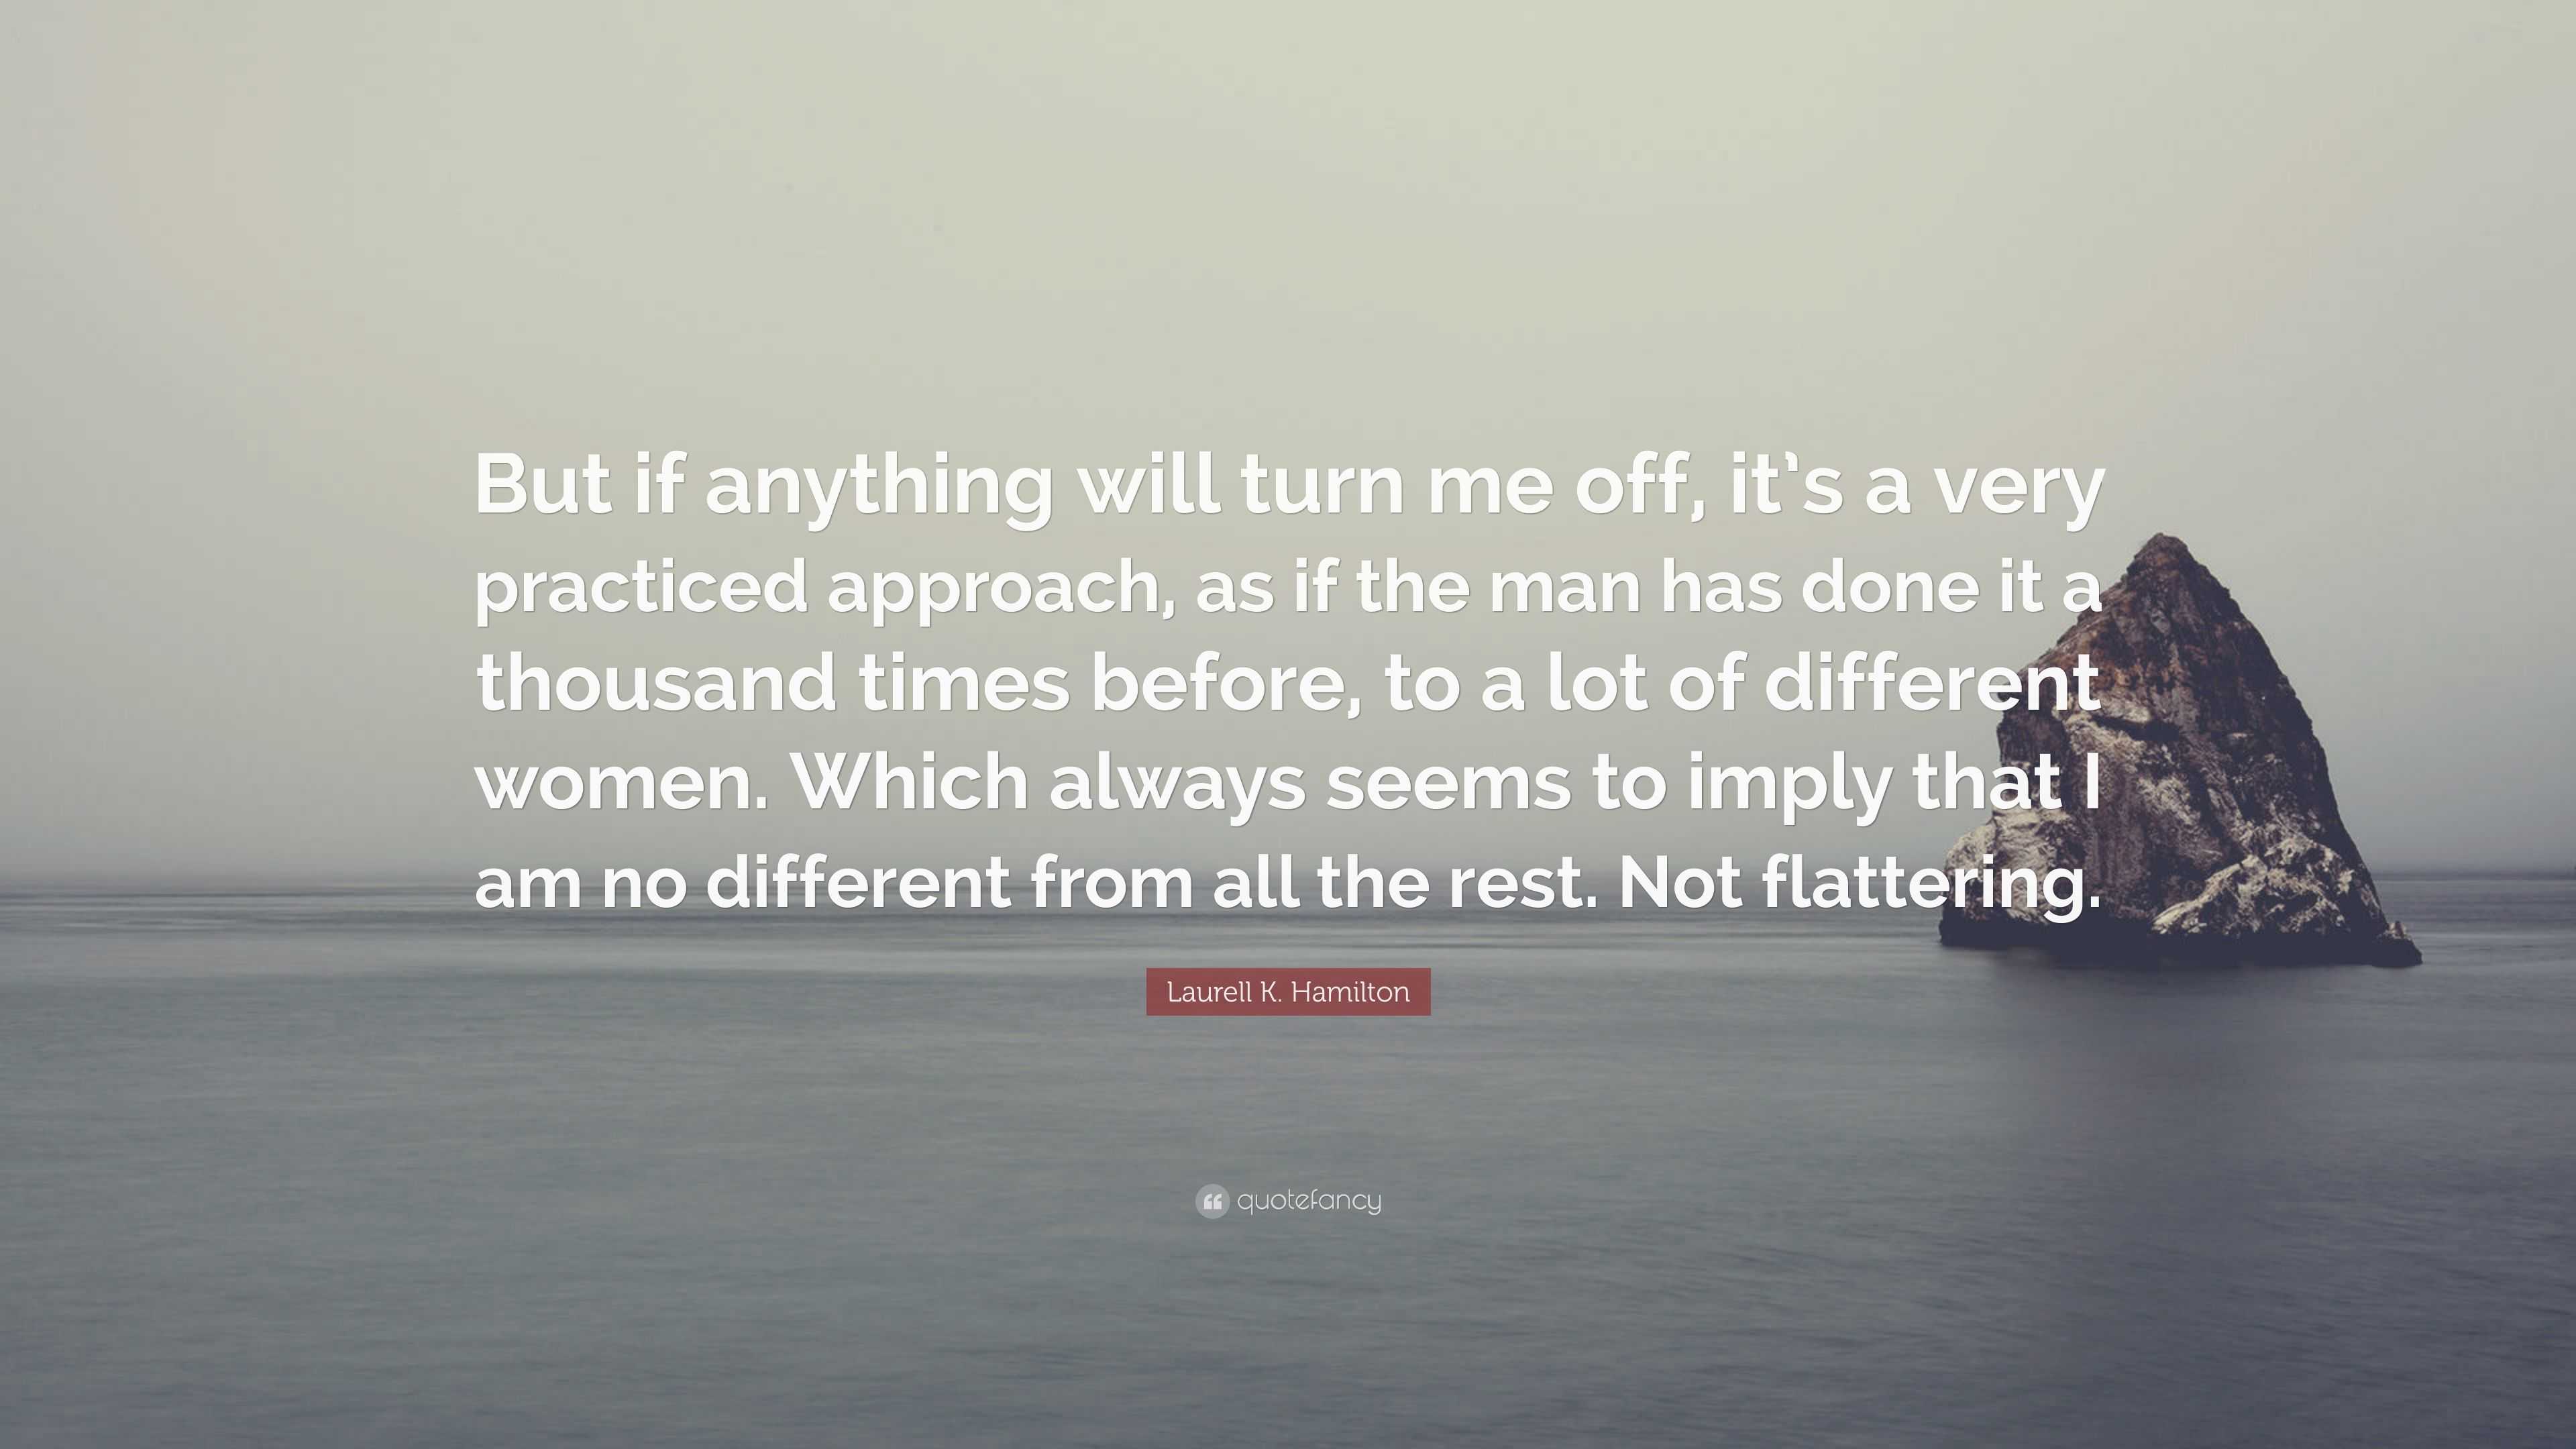 Laurell K. Hamilton Quote: “But if anything will turn me off, it’s a ...